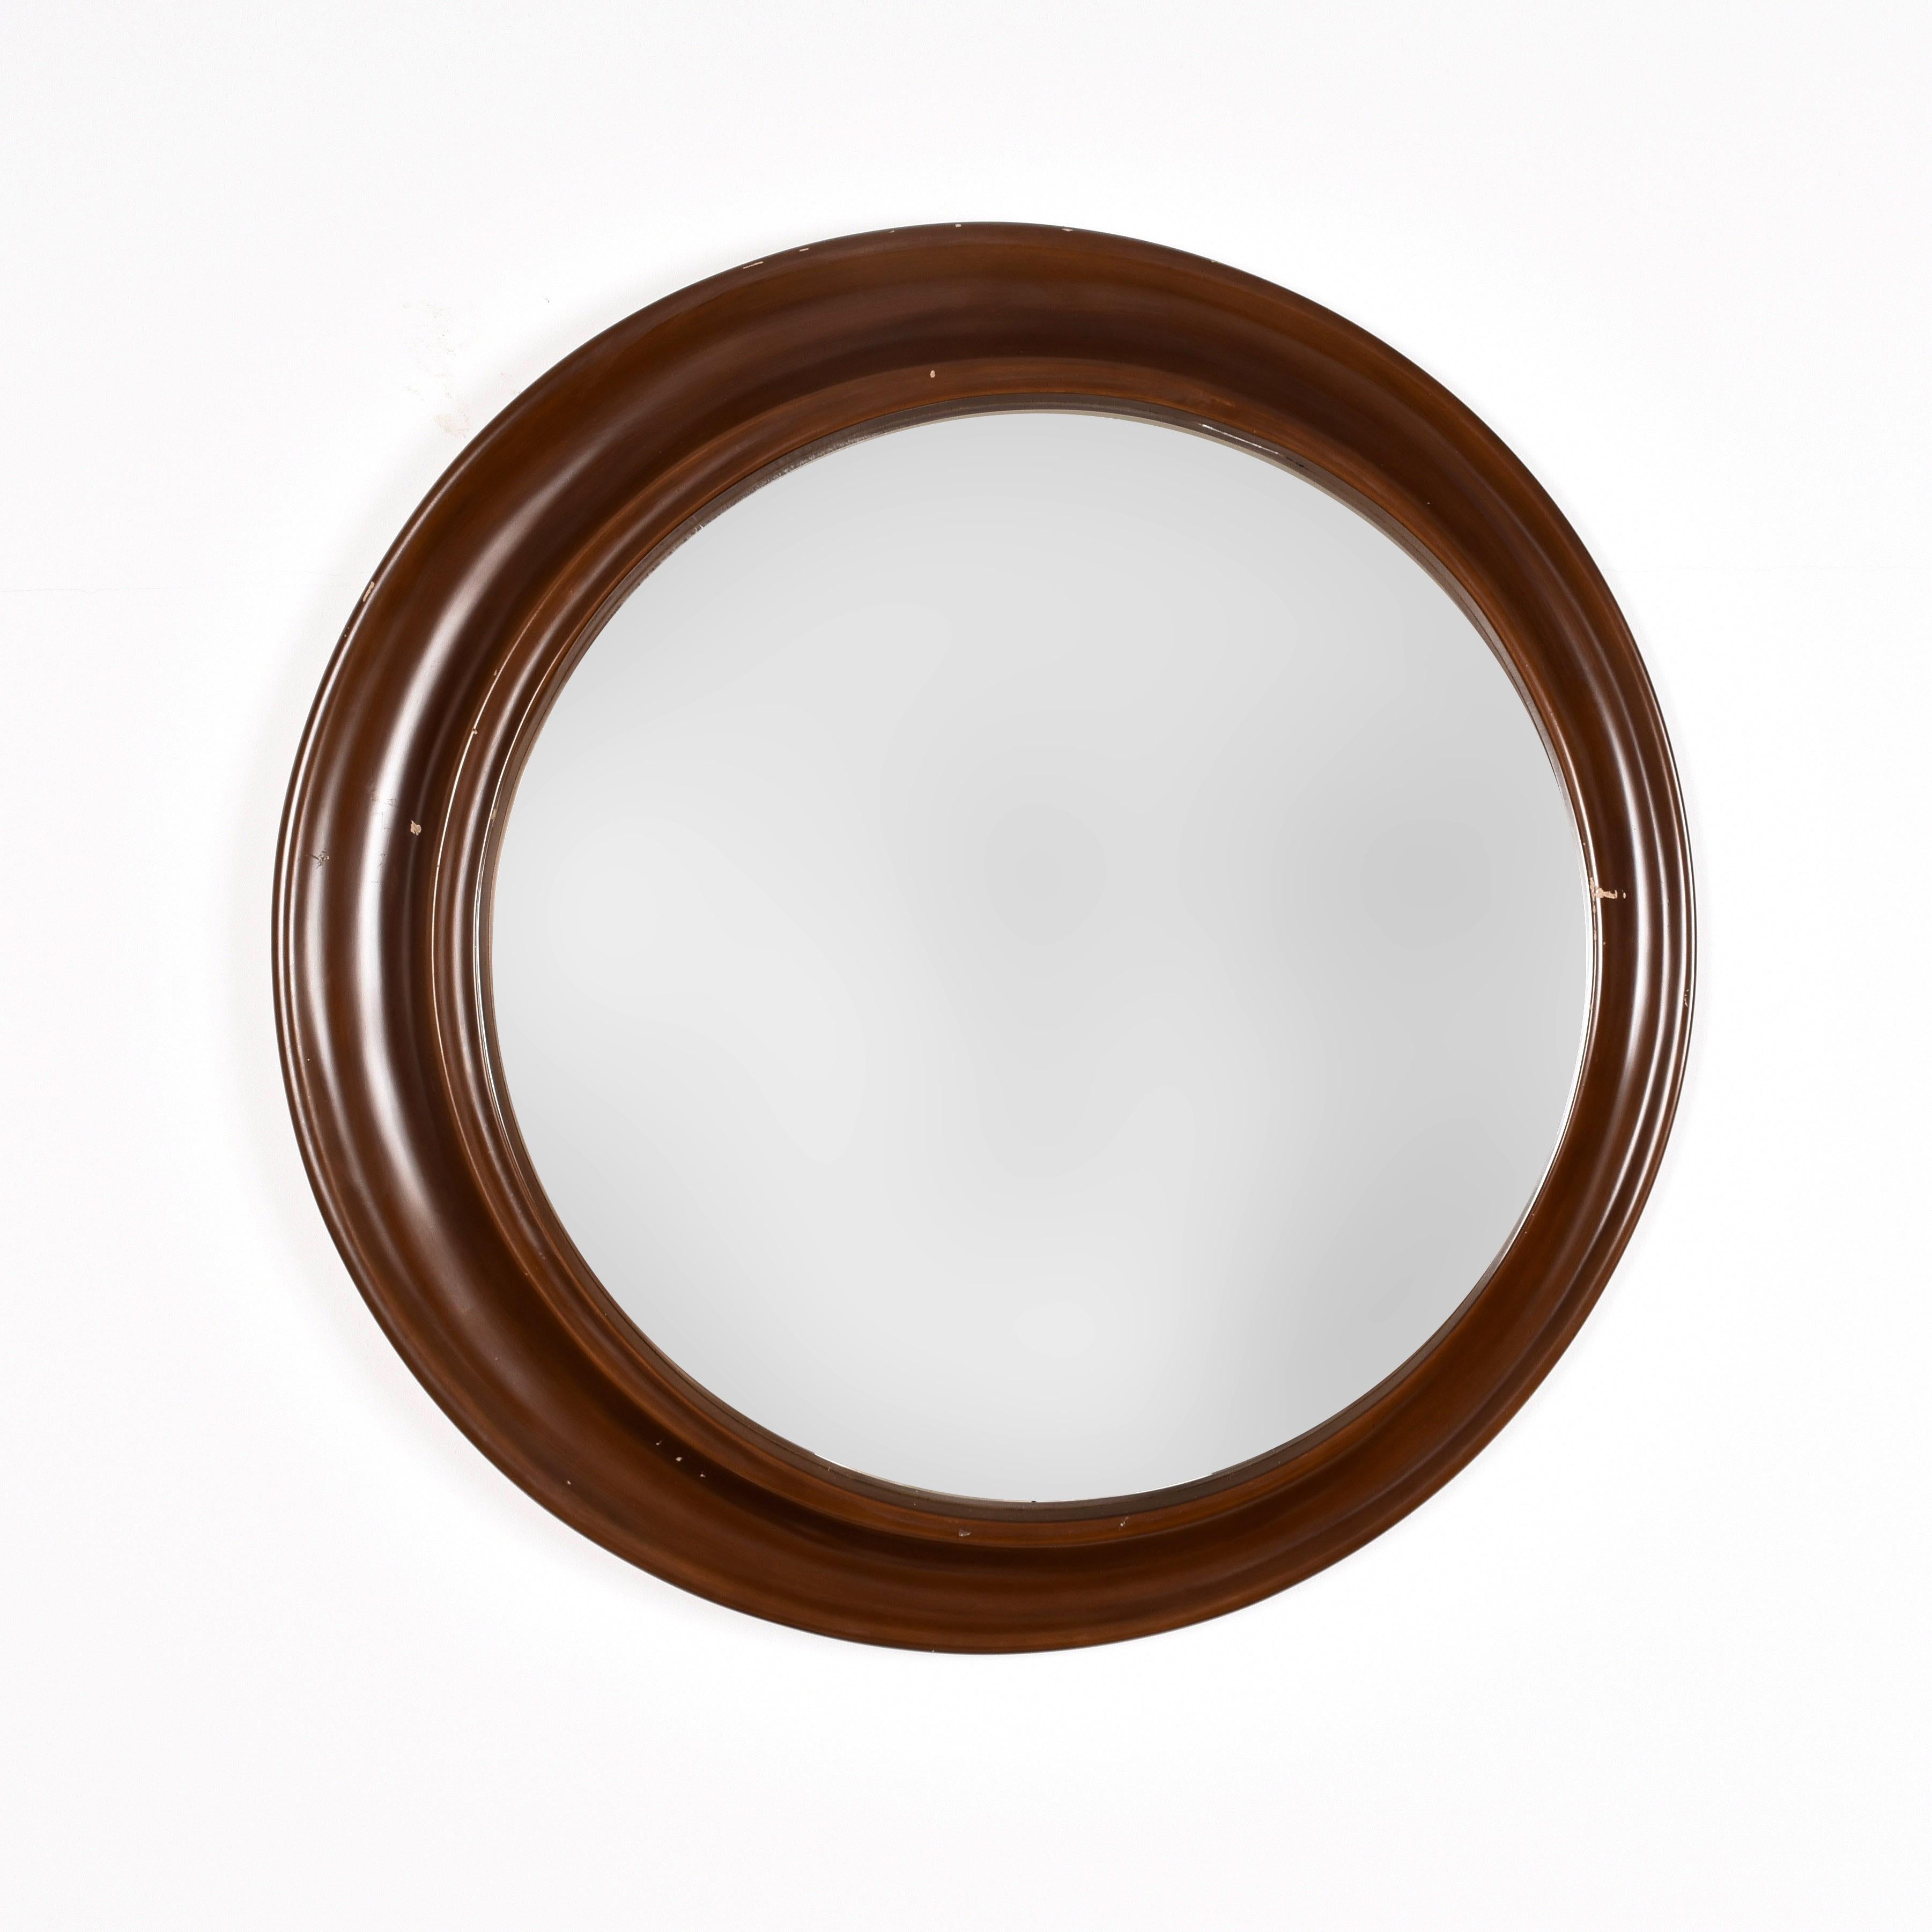 Mid-Century Modern Round Mirror with Frame in Lacquered Wood, Italy Design, 1970s